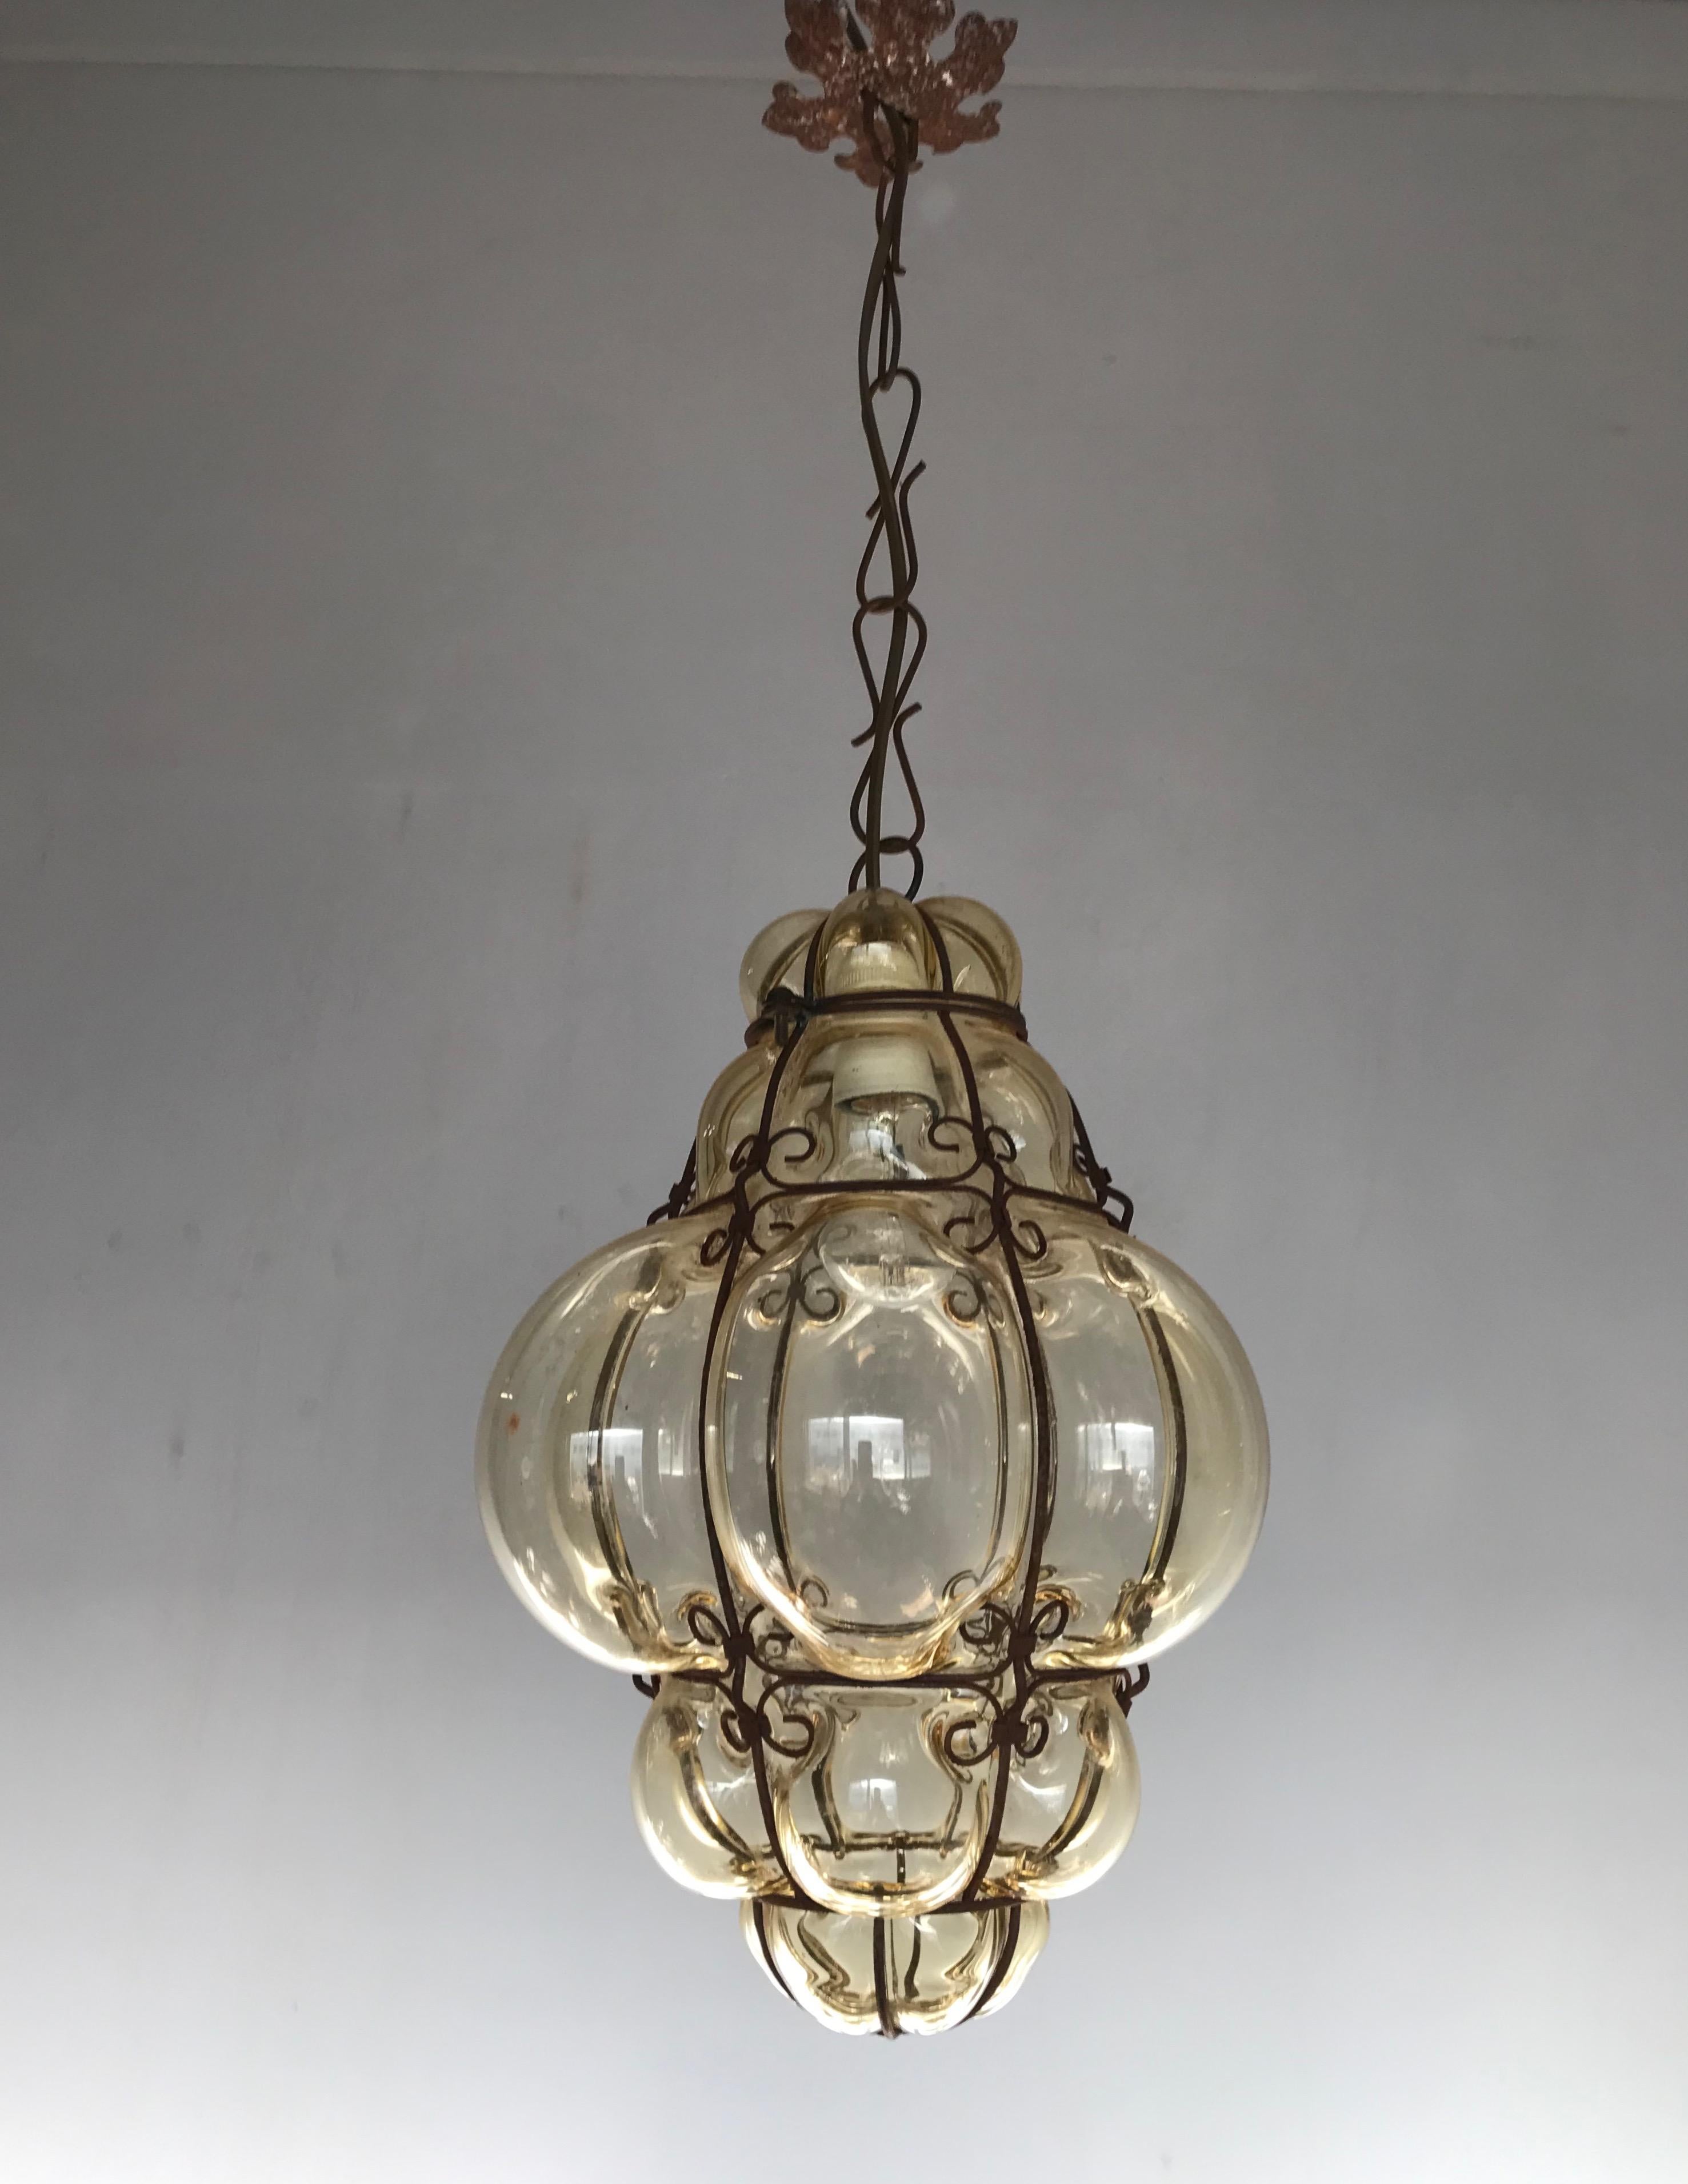 20th Century Antique Italy Venetian Murano Pendant Light Mouthblown Smoking Glass in Frame